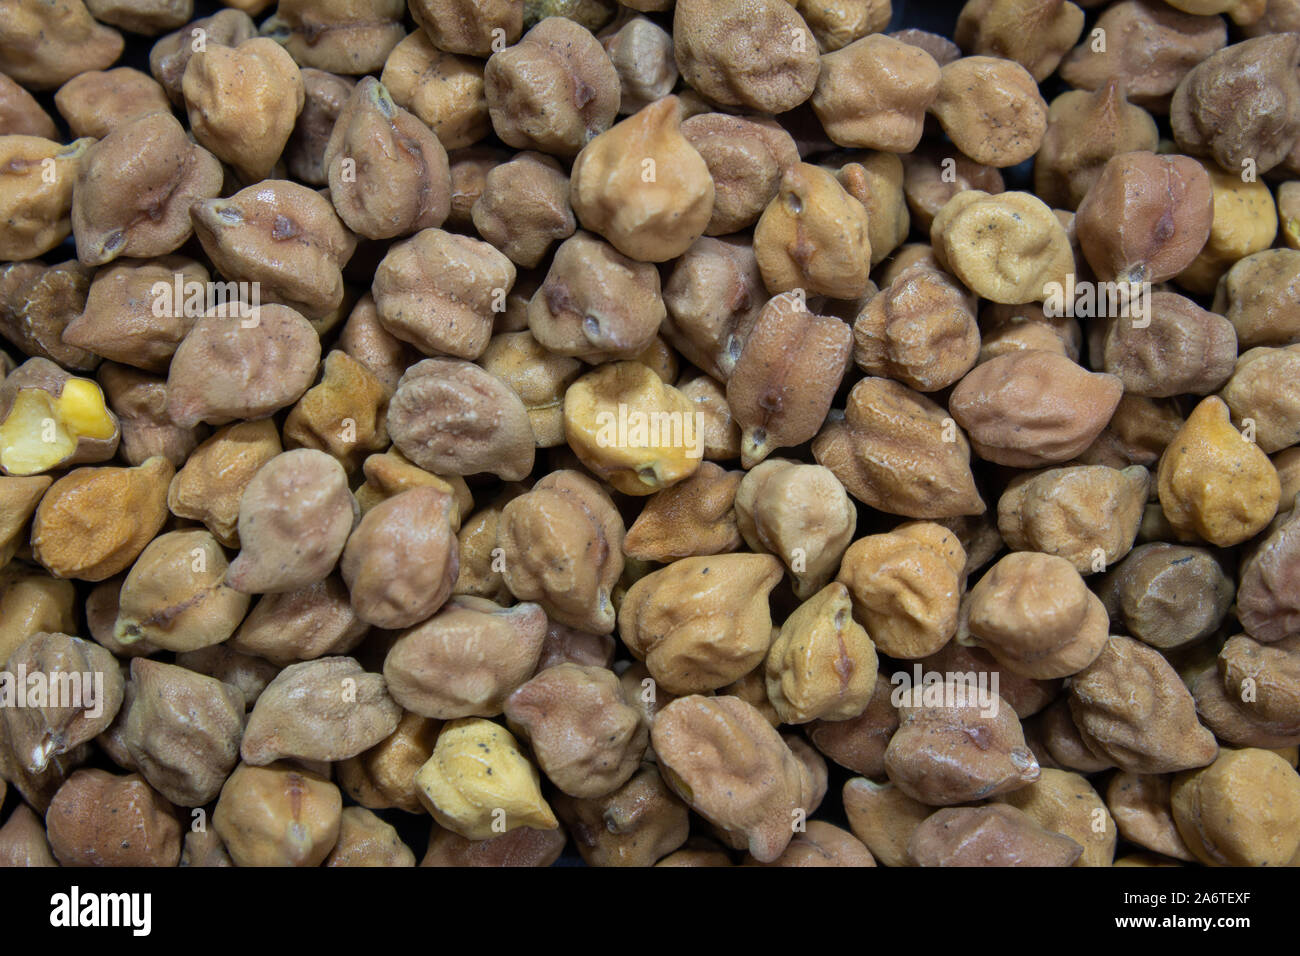 View of Black Chickpeas in a heap Stock Photo